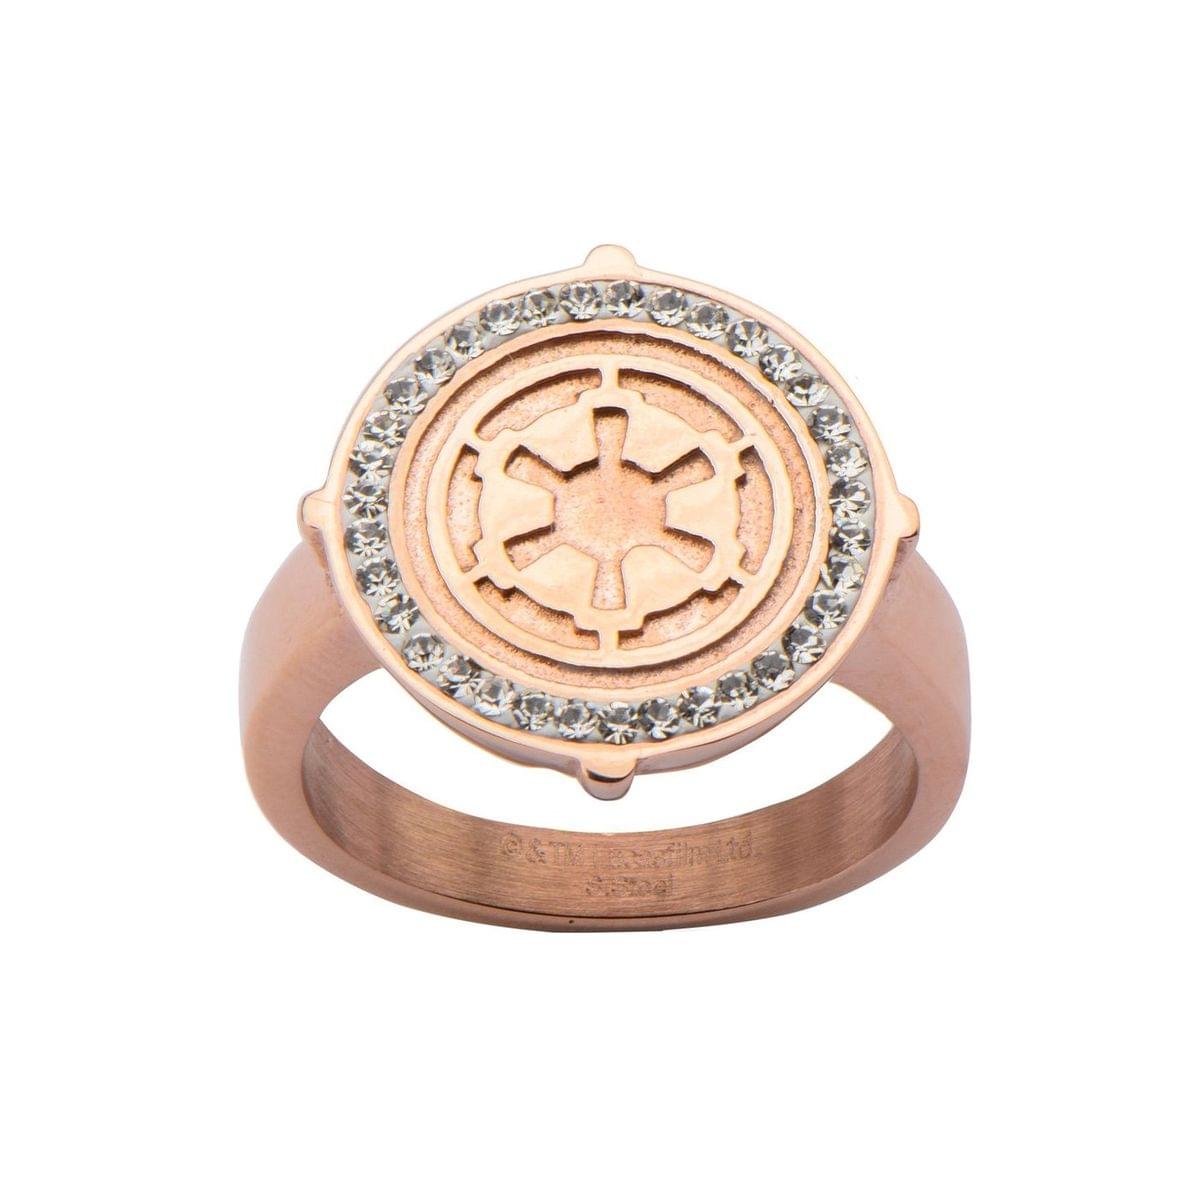 Star Wars Galactic Empire Women's Rose Gold Stainless Steel Ring